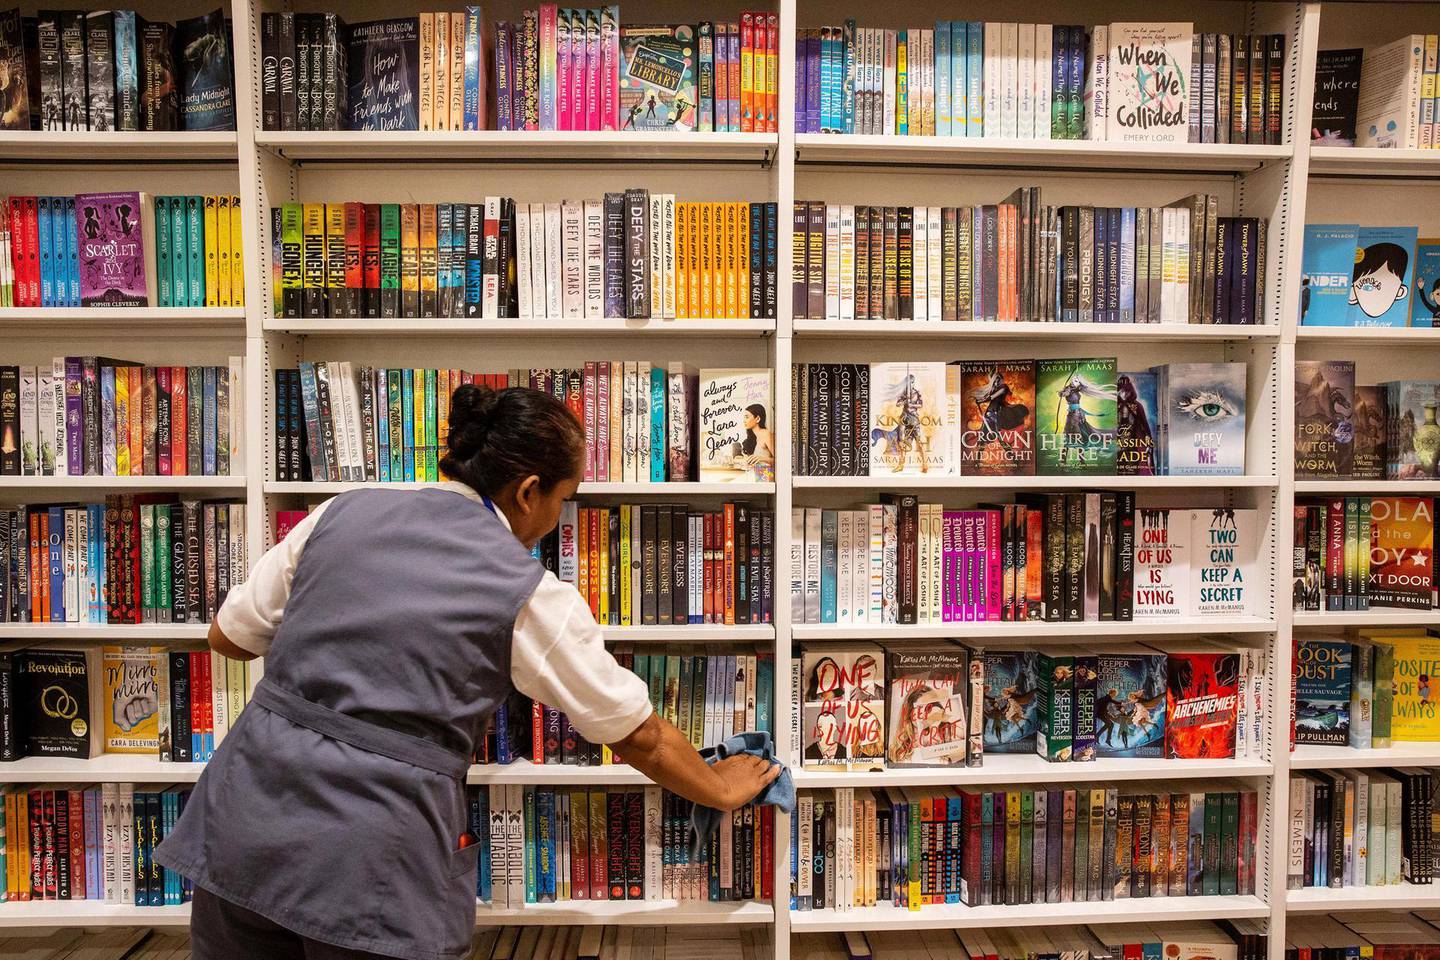 A worker cleans in the Kinokuniya Co. book store at the Aeon Mall in Phnom Penh, Cambodia, Sunday, May 26, 2019. Kinokuniya, Japan's largest bookstore chain, opened their first store in the Shinjuku district of Tokyo in January 1927 and now have over 80 stores worldwide, according to the company's website. Photograph: Taylor Weidman/Bloomberg